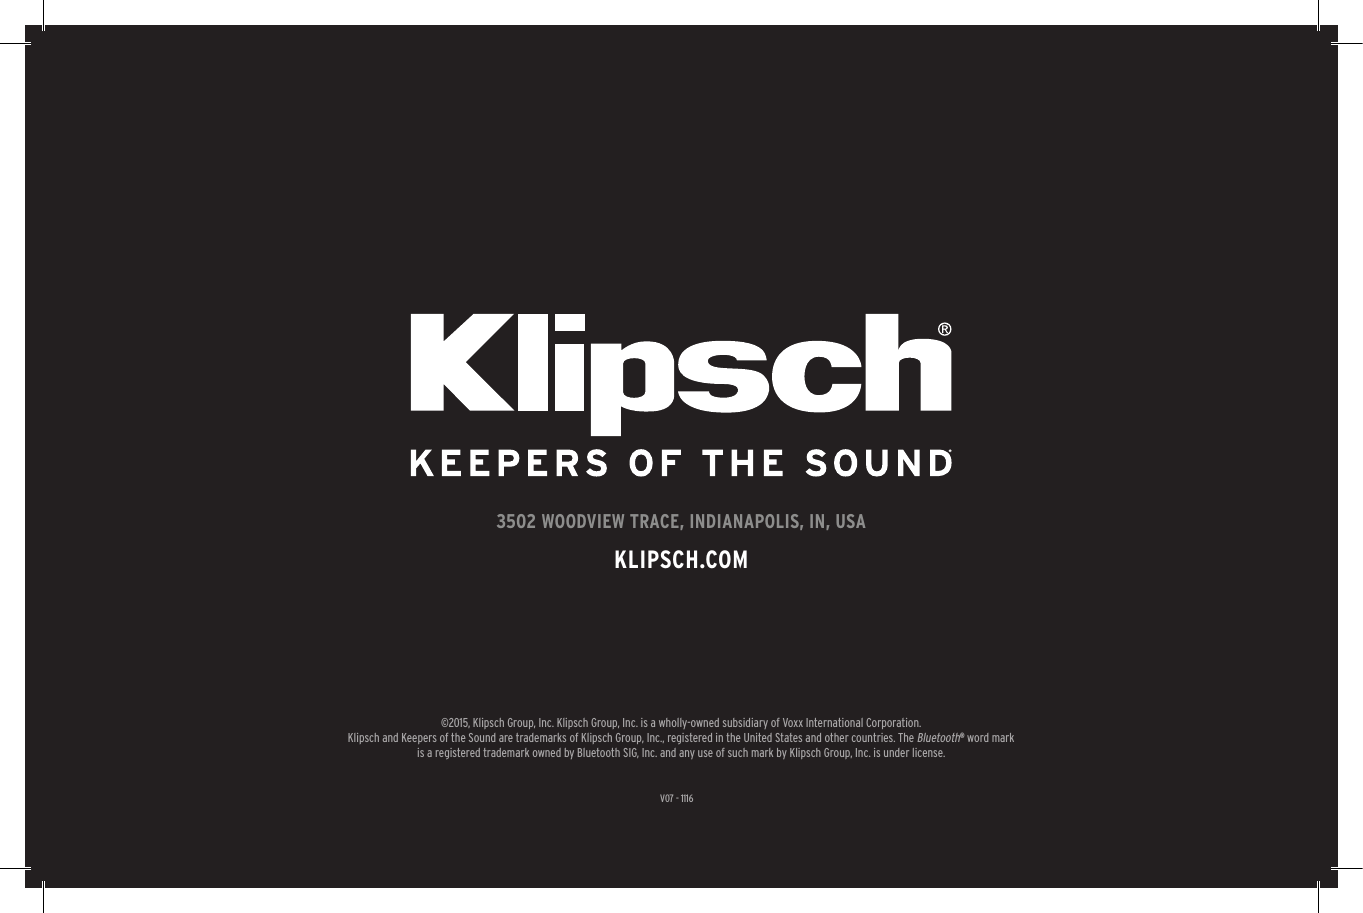 V07 - 11163502 WOODVIEW TRACE, INDIANAPOLIS, IN, USAKLIPSCH.COM©2015, Klipsch Group, Inc. Klipsch Group, Inc. is a wholly-owned subsidiary of Voxx International Corporation.Klipsch and Keepers of the Sound are trademarks of Klipsch Group, Inc., registered in the United States and other countries. The Bluetooth® word mark is a registered trademark owned by Bluetooth SIG, Inc. and any use of such mark by Klipsch Group, Inc. is under license. 